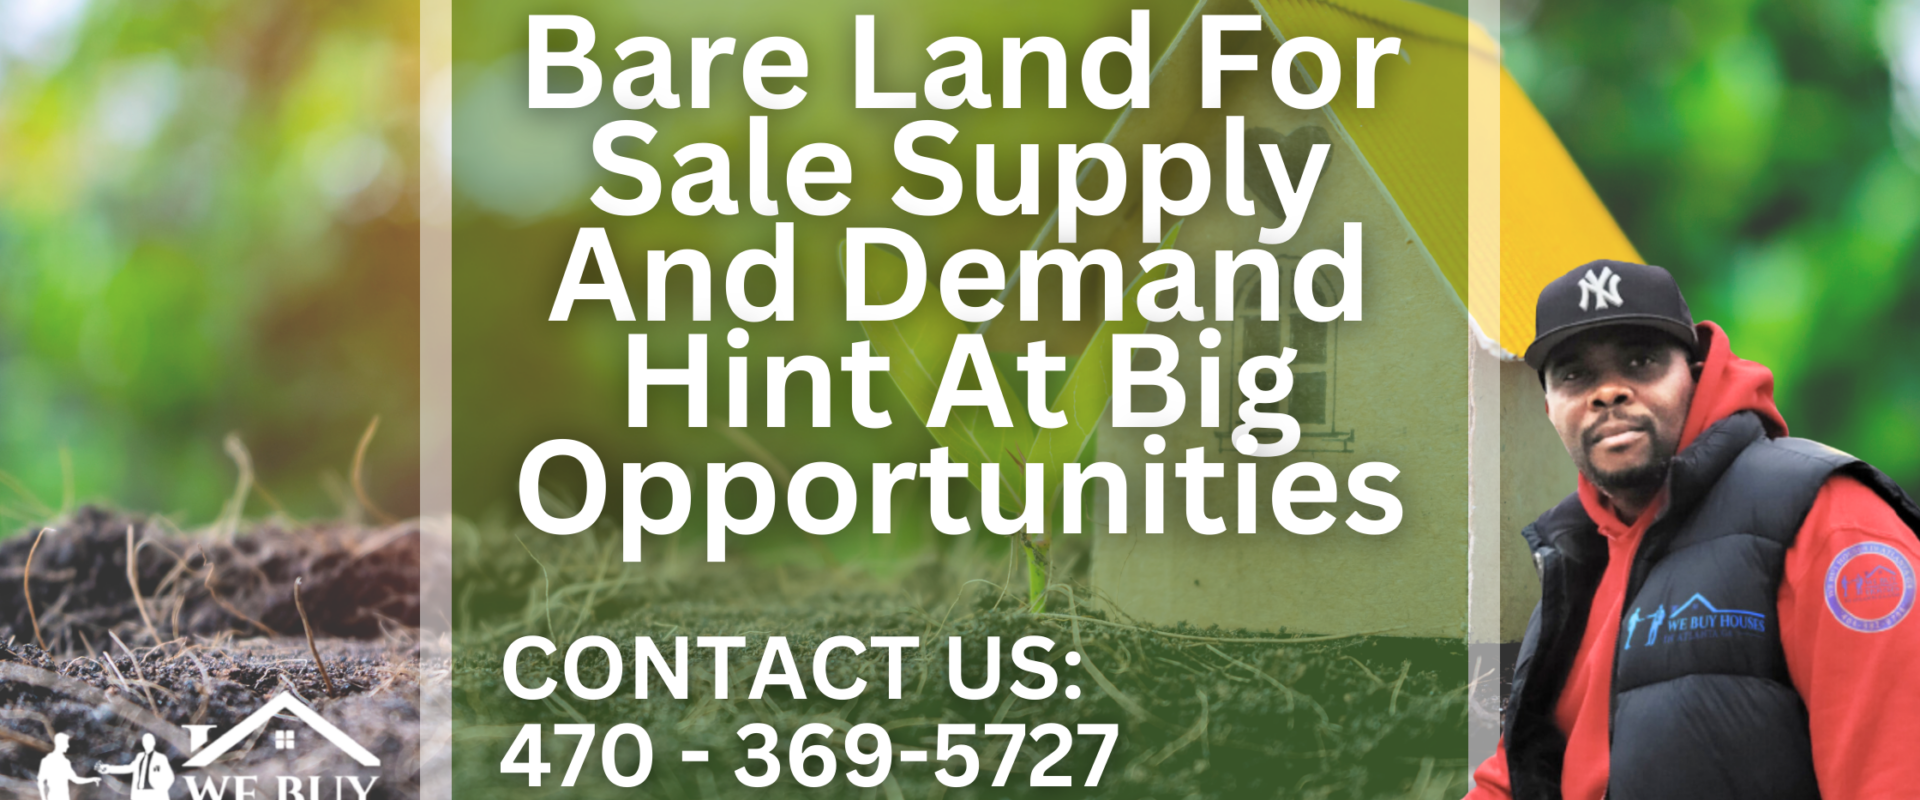 Bare Land For Sale Supply And Demand Hint At Big Opportunities